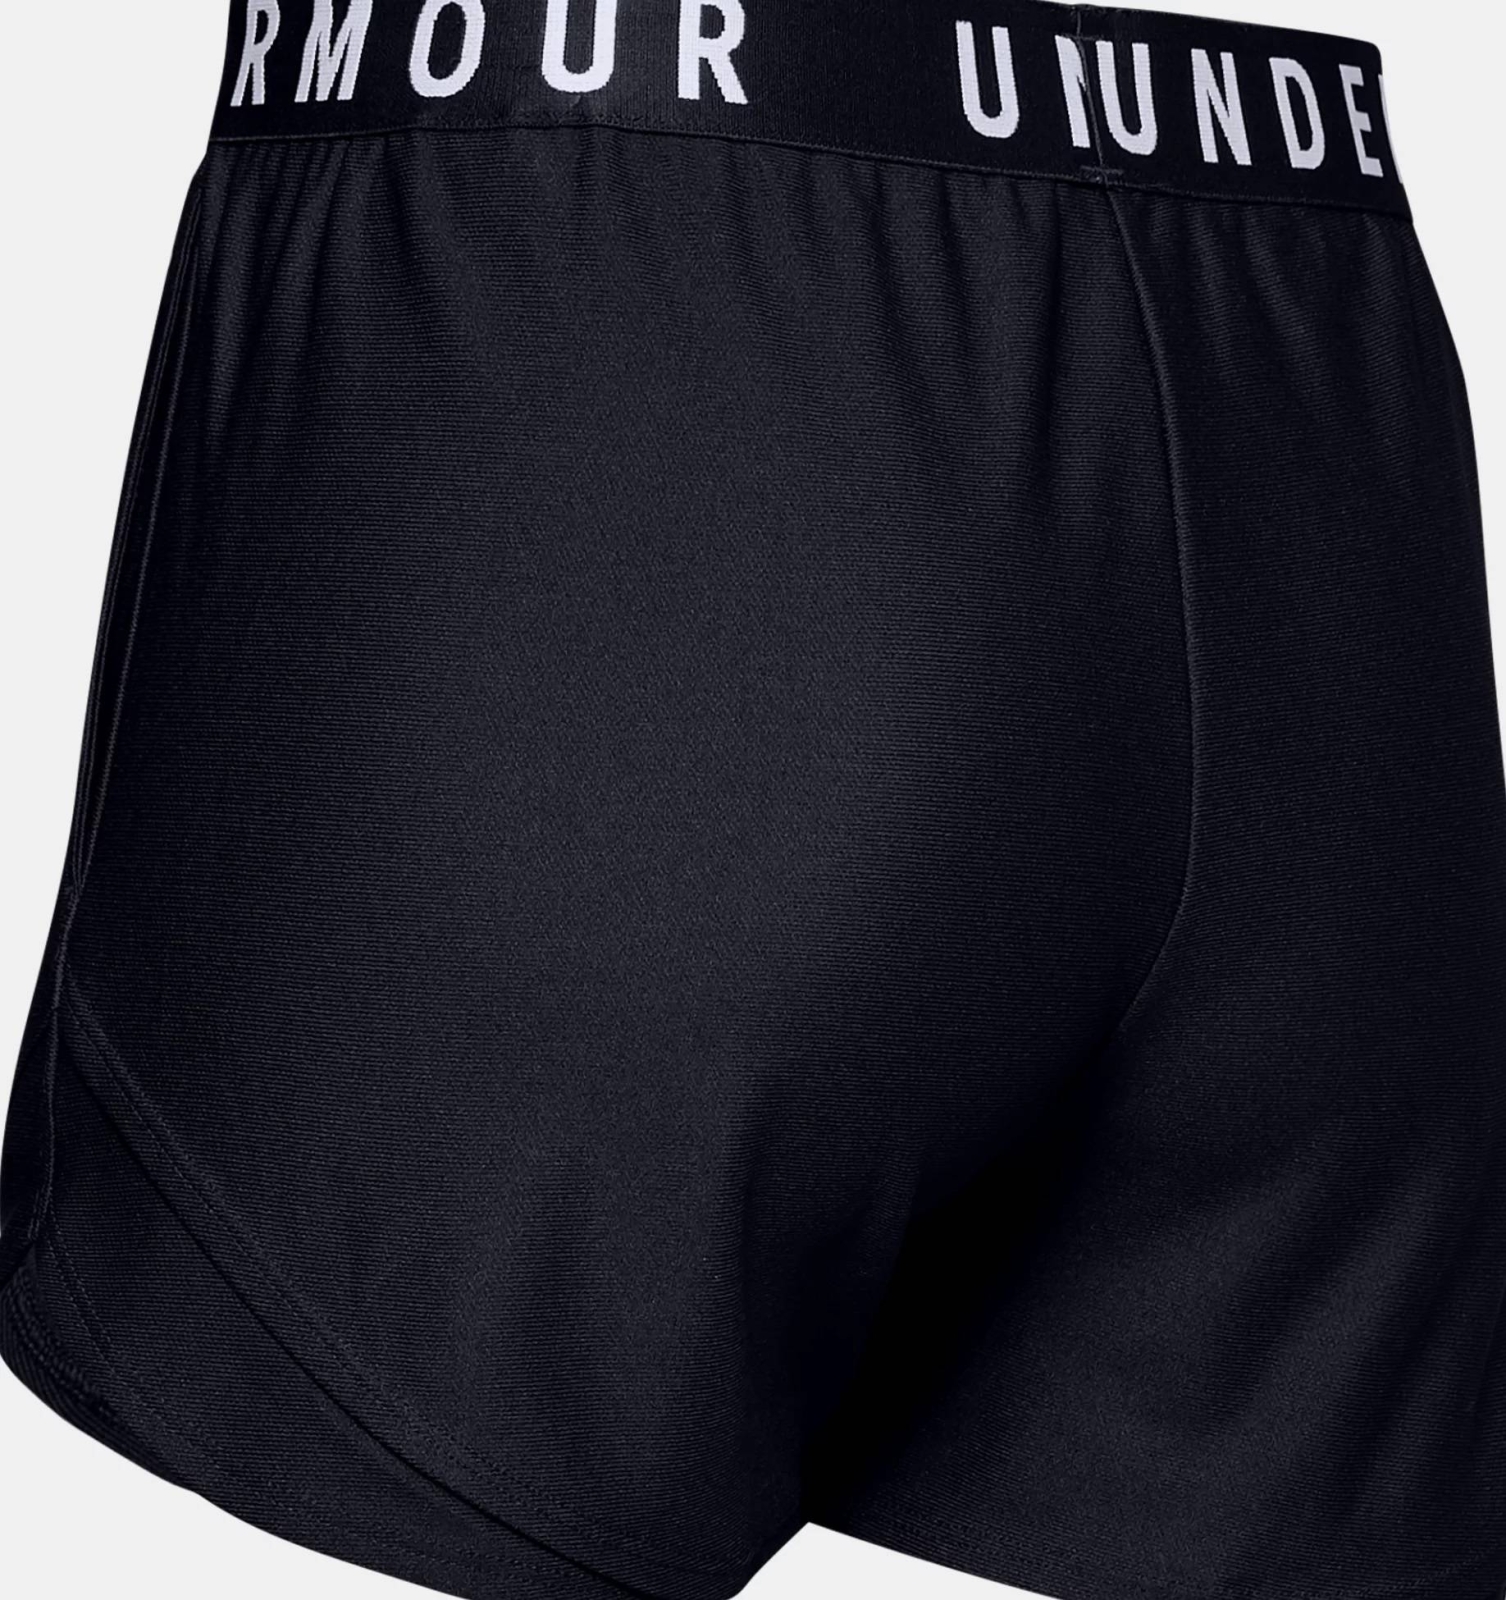 UNDER ARMOUR PLAY UP SHORTS 3.0